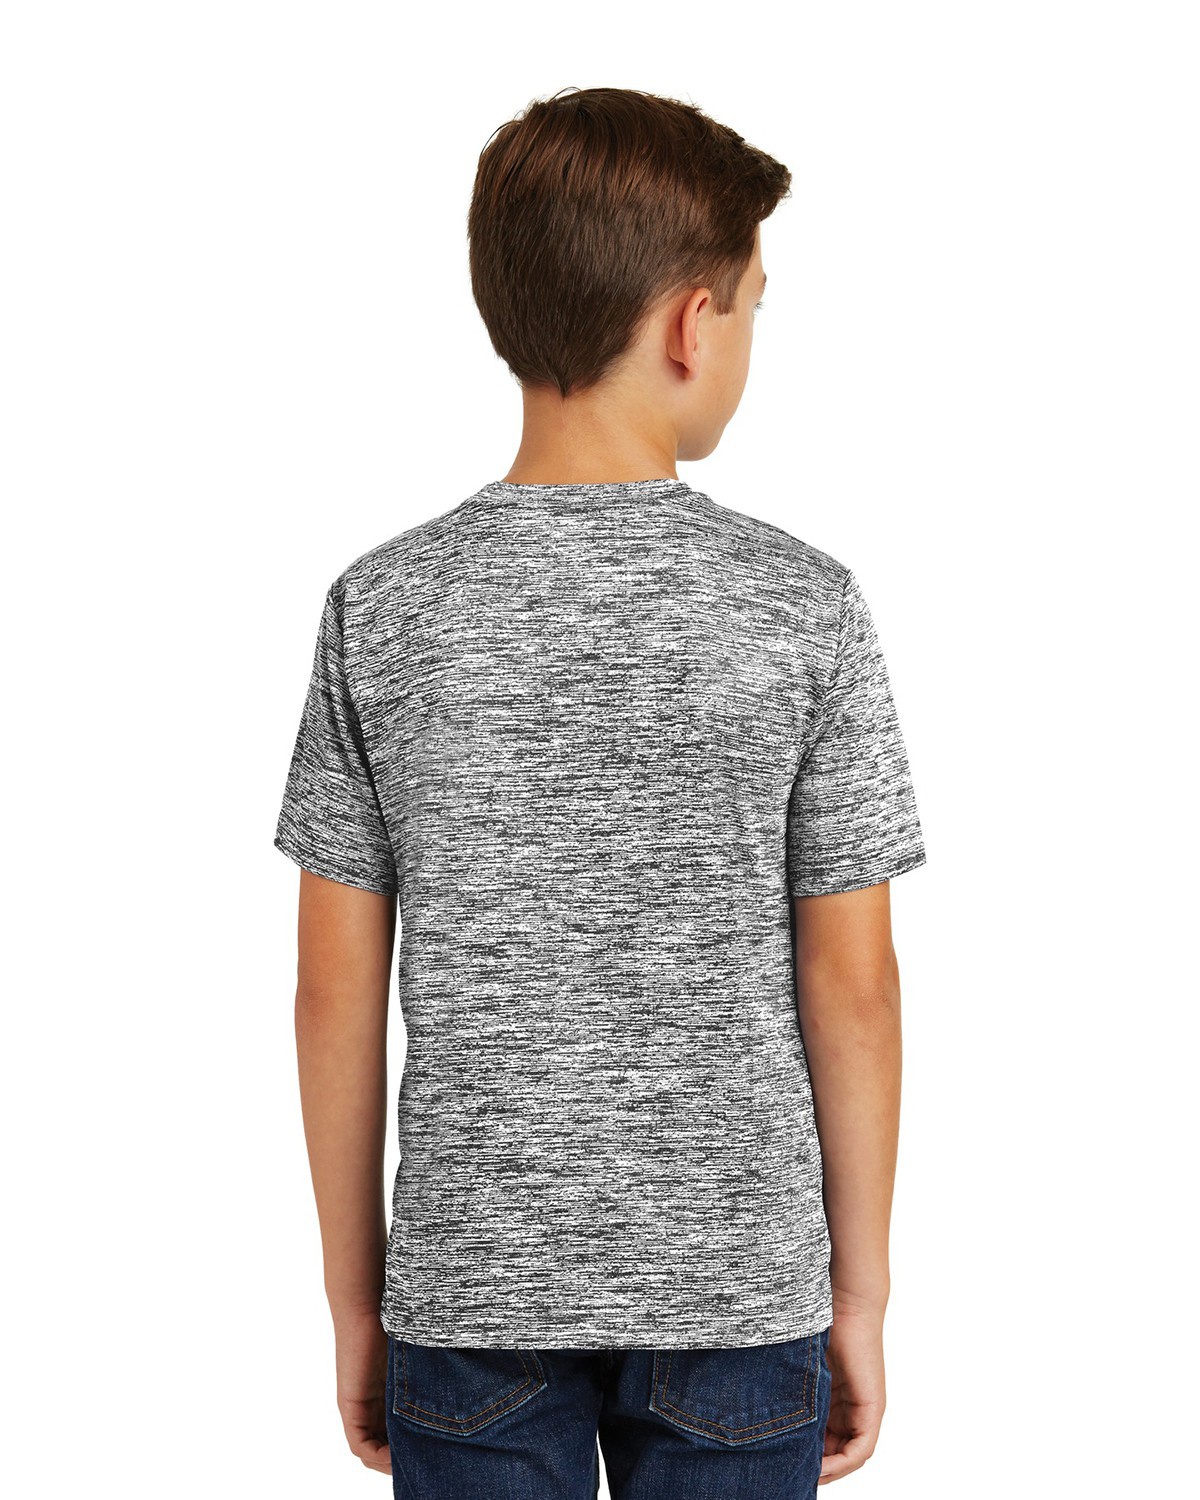 'Sport Tek YST390 Youth PosiCharge Electric Heather Tee'